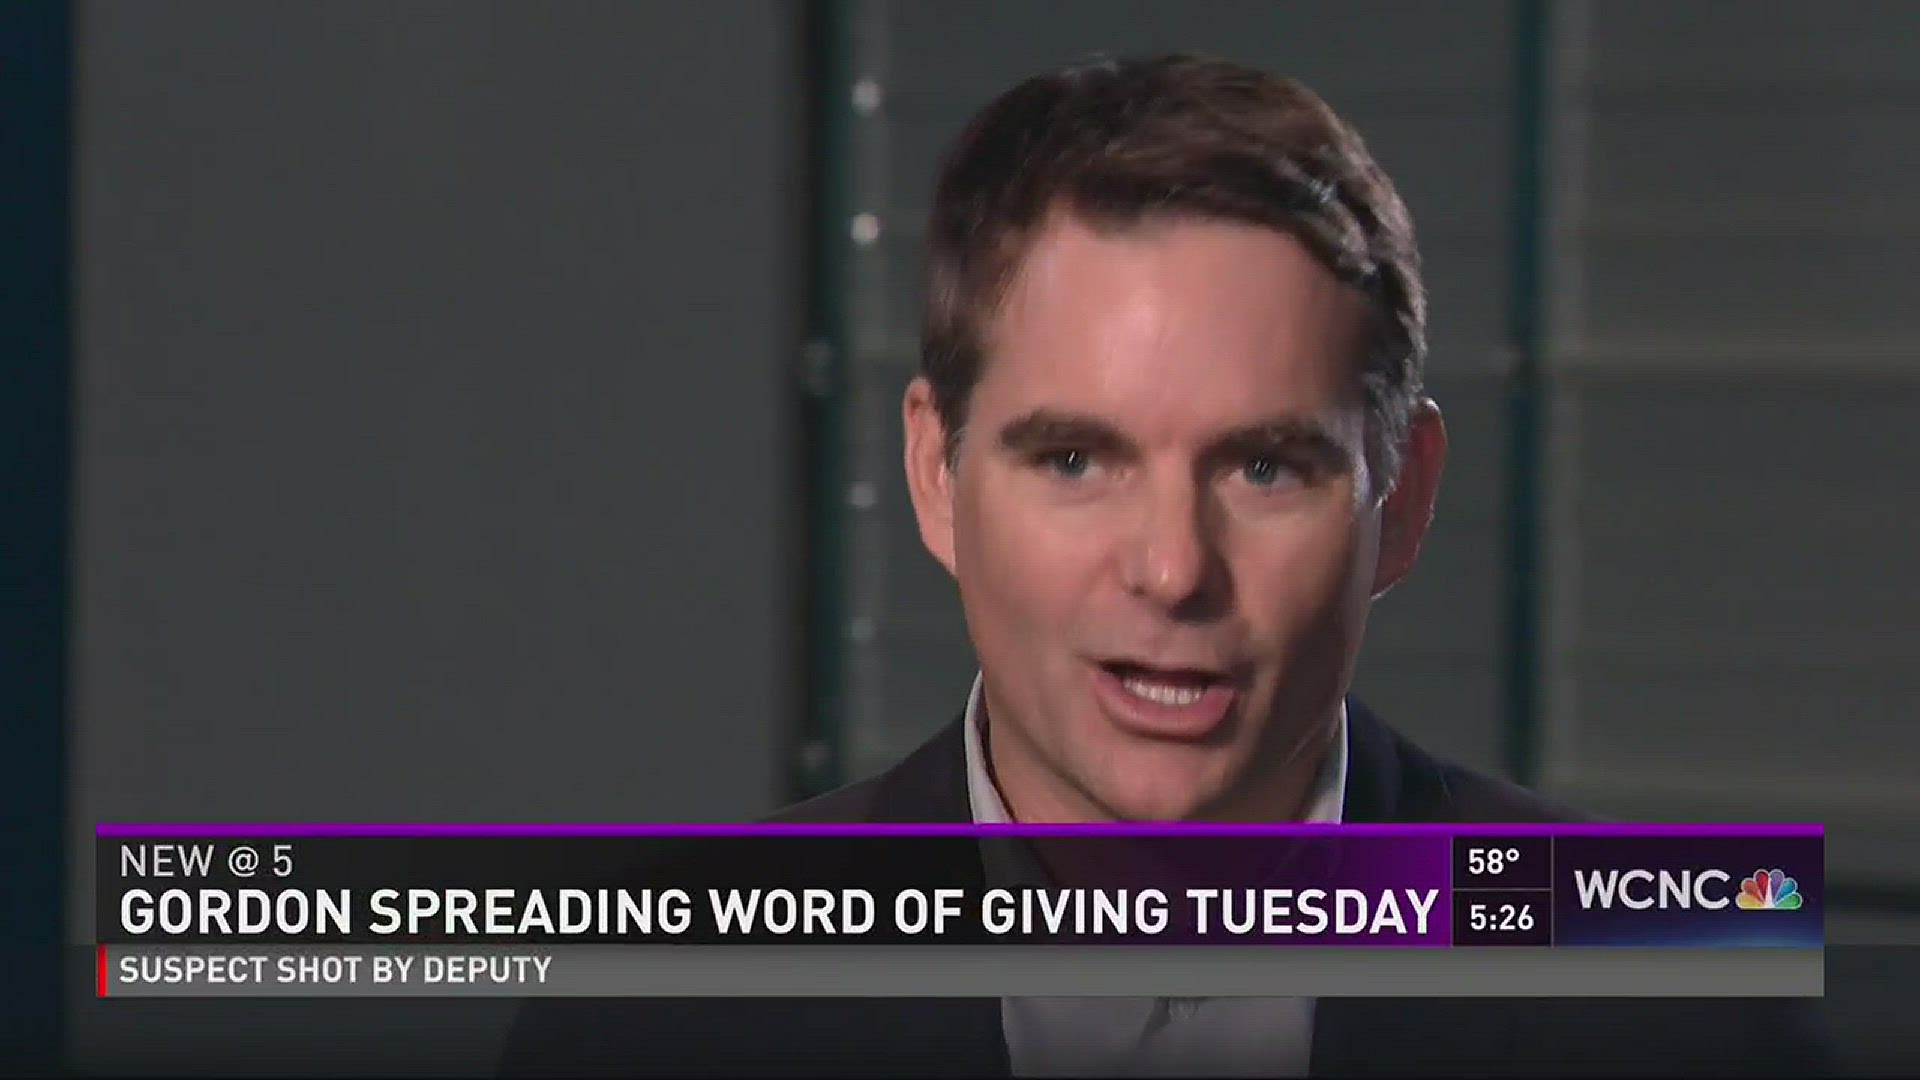 Jeff Gordon helps spread the word of Giving Tuesday